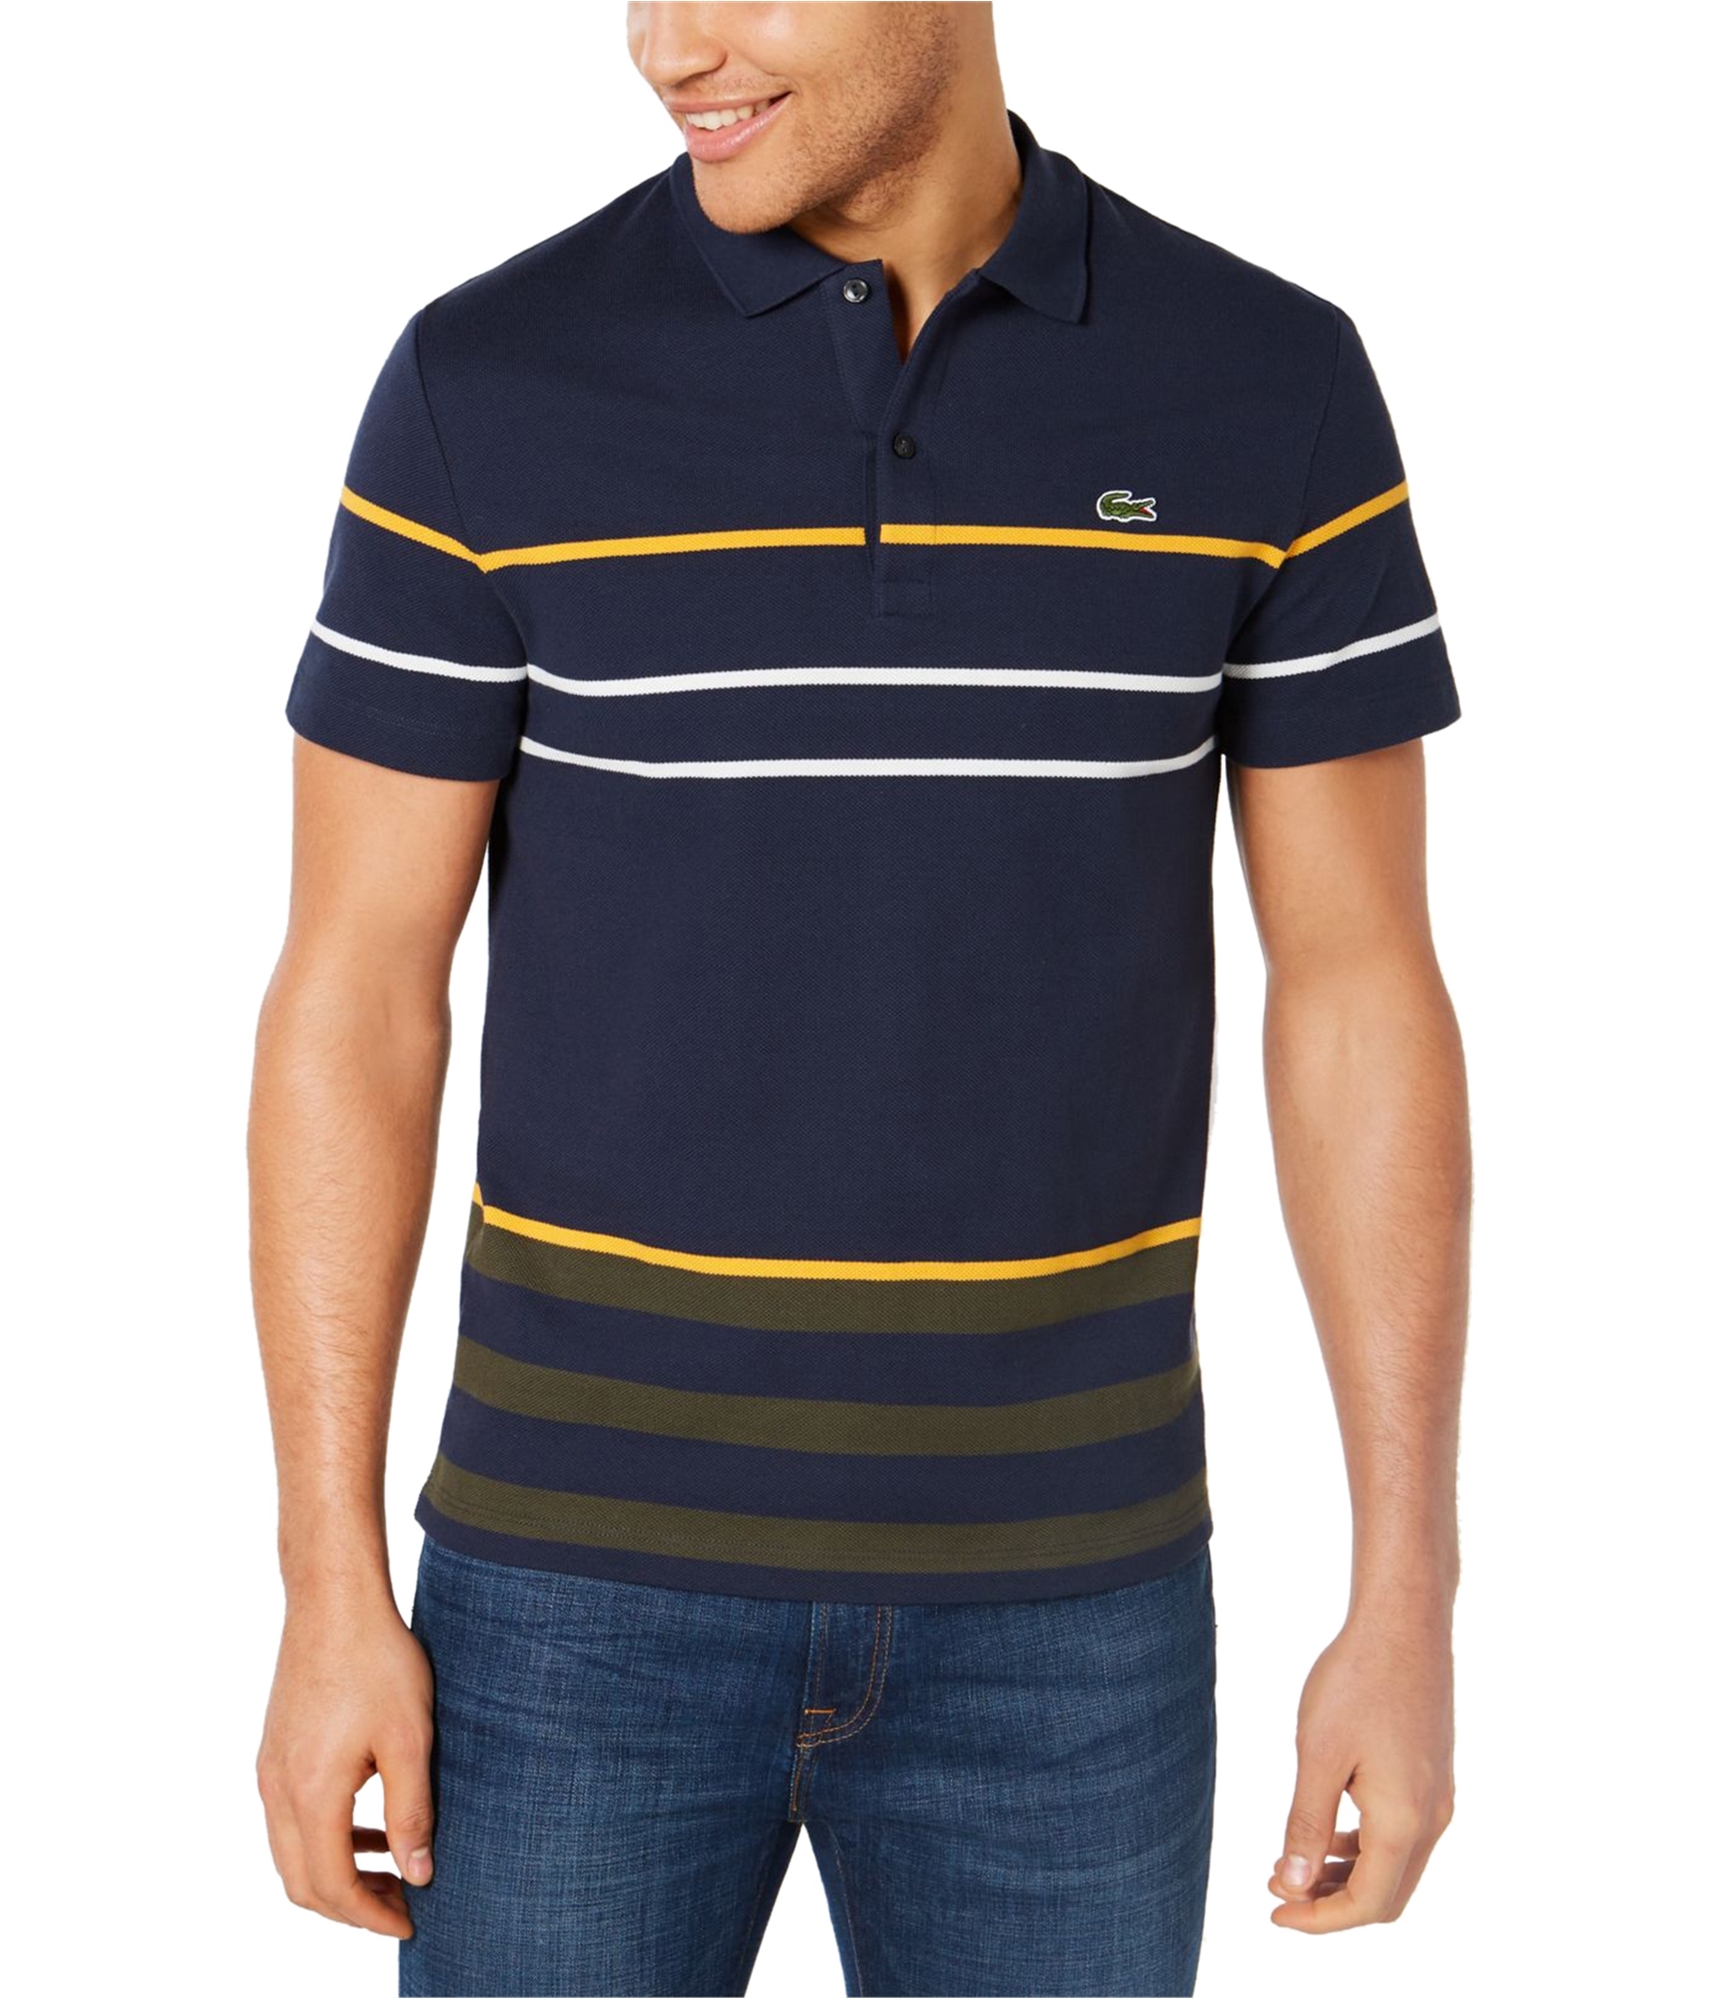 Buy a Mens Regular Fit Rugby Shirt Online | TagsWeekly.com